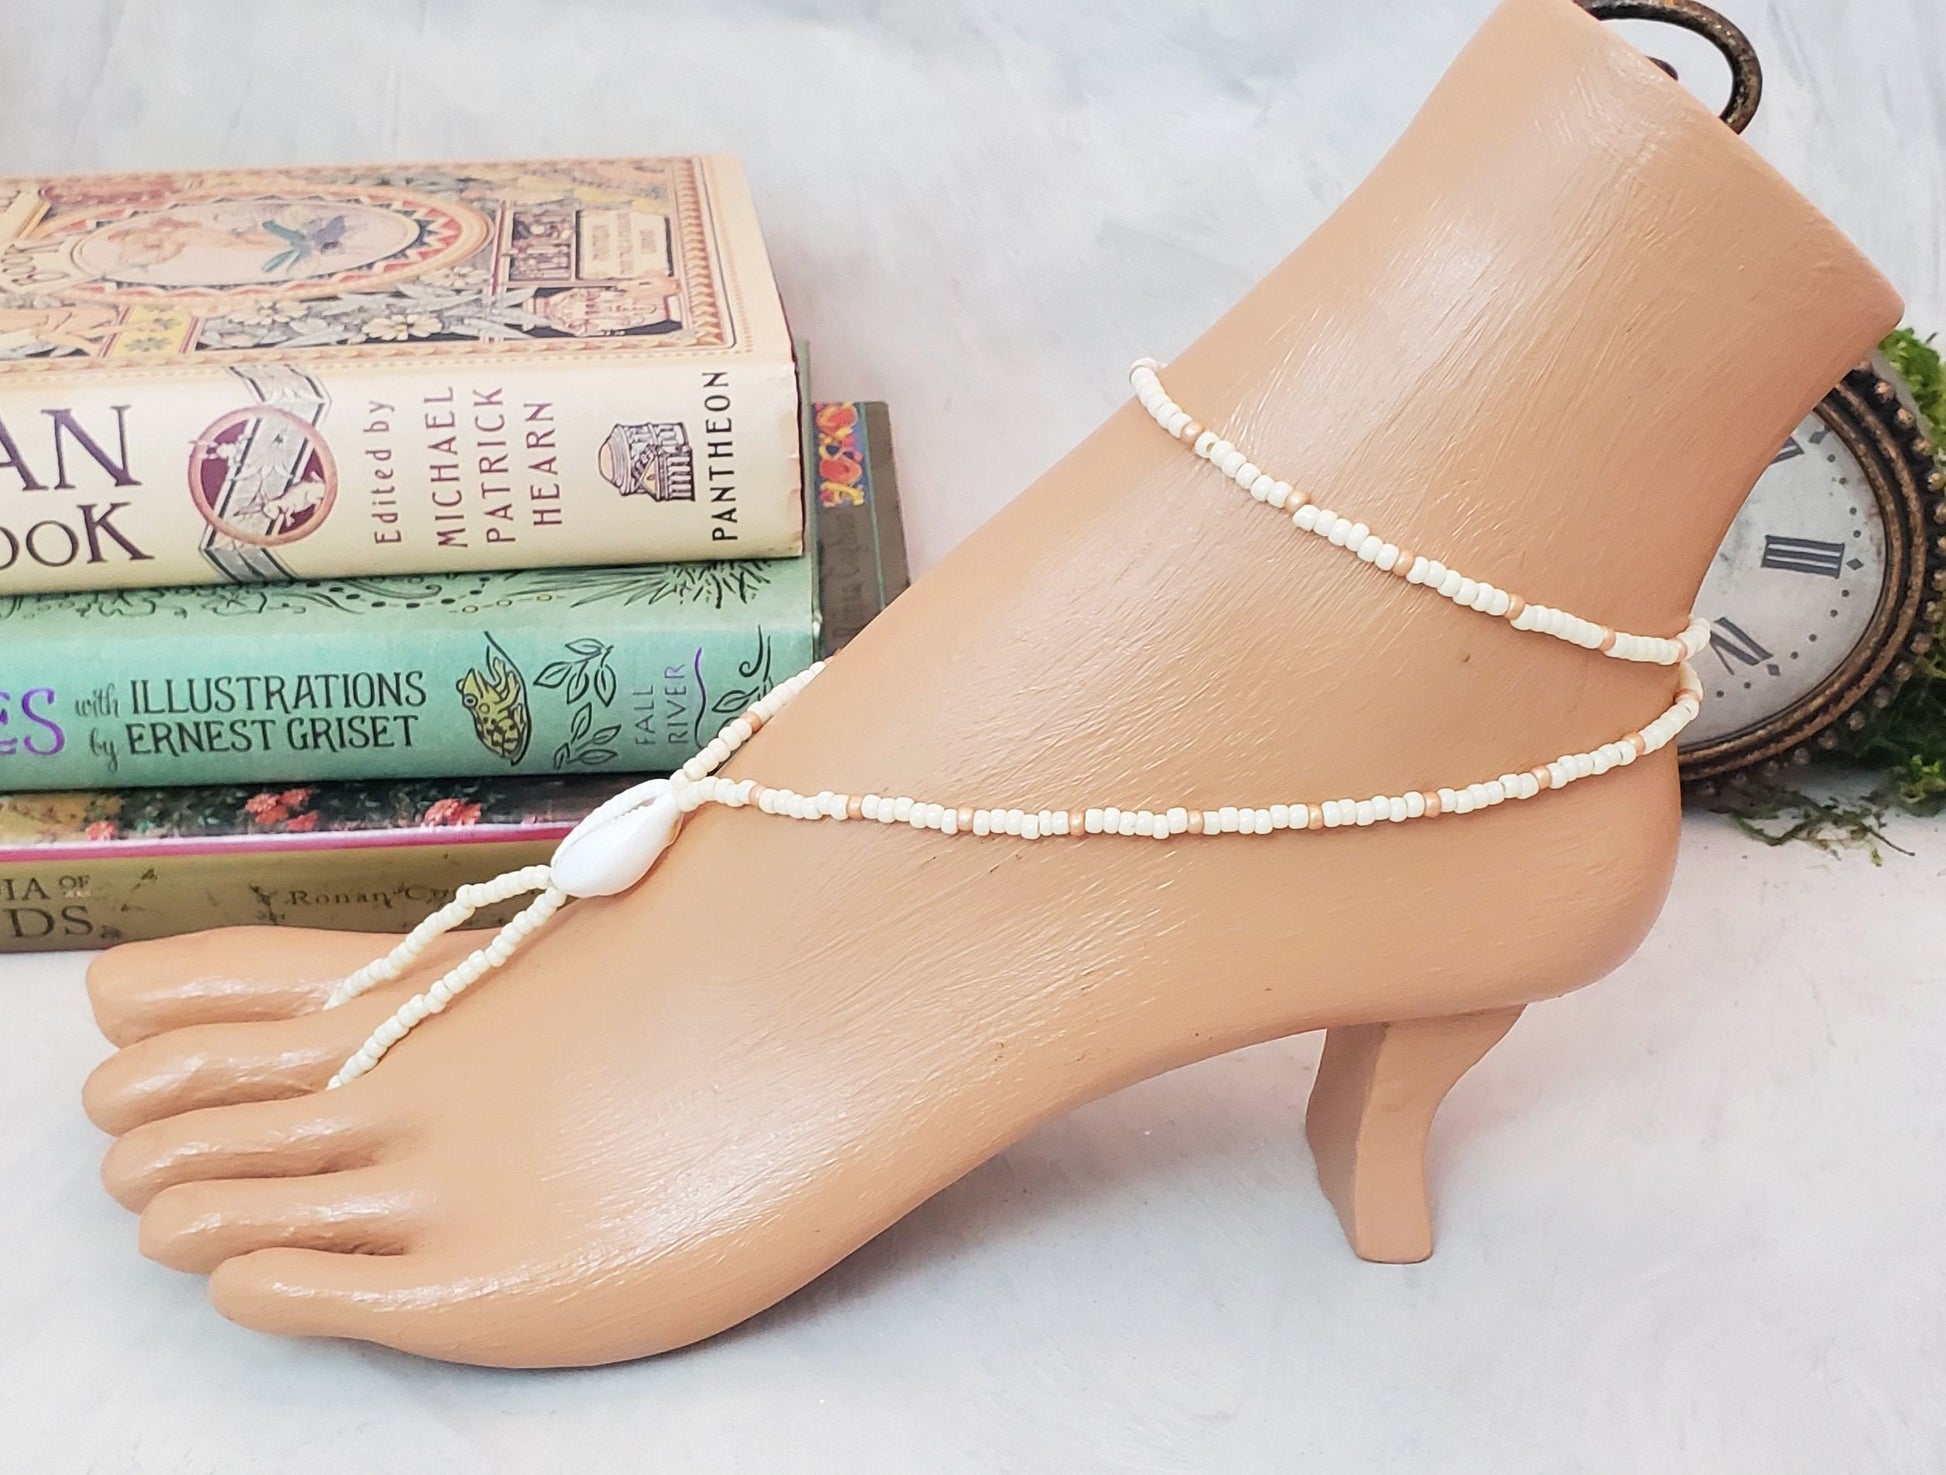 Elastic Beaded Barefoot Sandal or Hand Flower in Opaque White/Ivory + Soft Copper w/Real Shell, Boho, Bohemian, Gypsy, Wedding, Bridesmaid